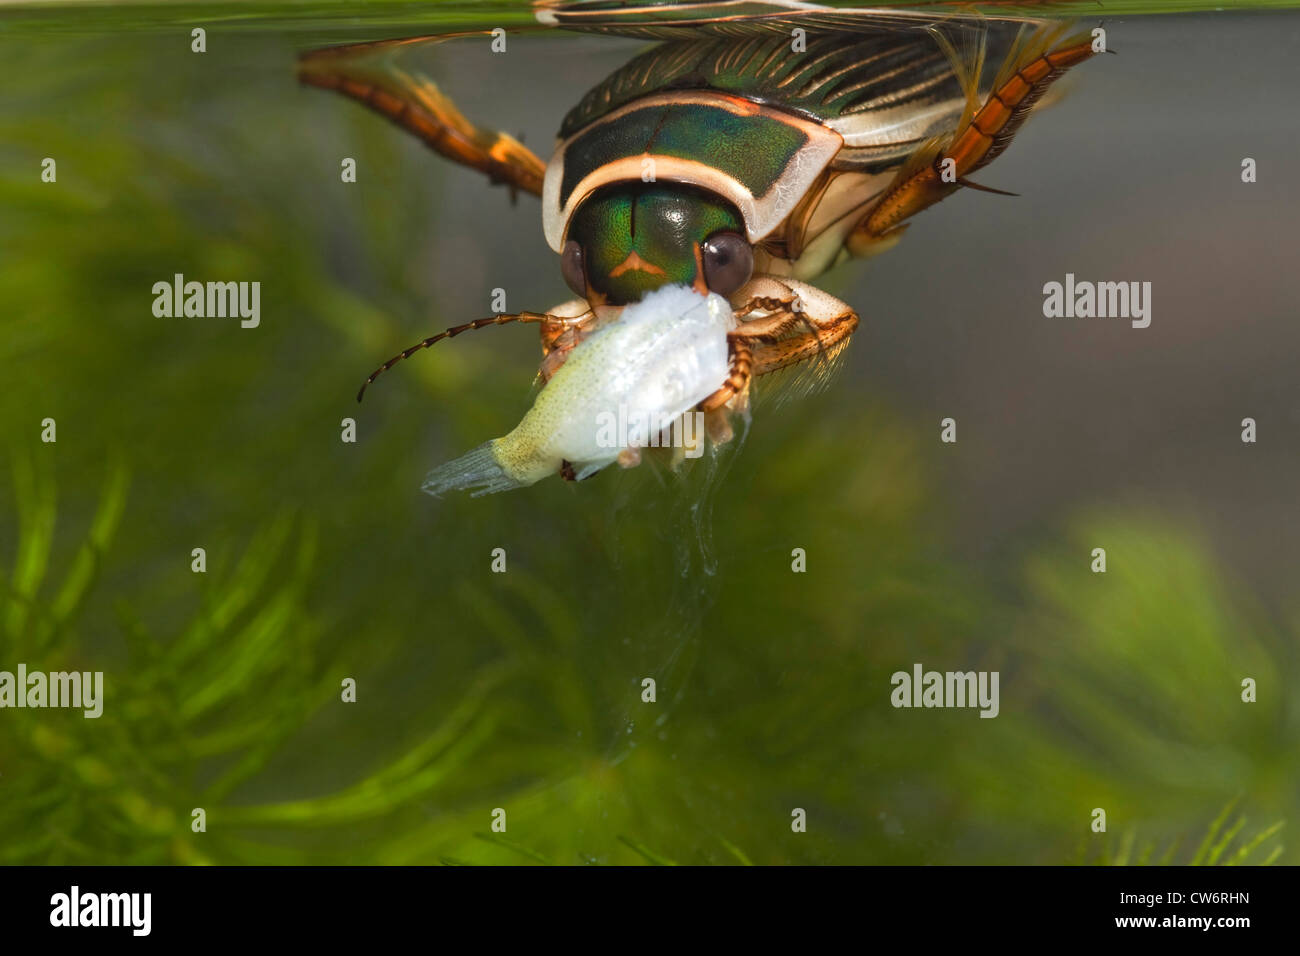 great diving beetle (Dytiscus marginalis), female feeding on a little fish, Germany, Schleswig-Holstein Stock Photo